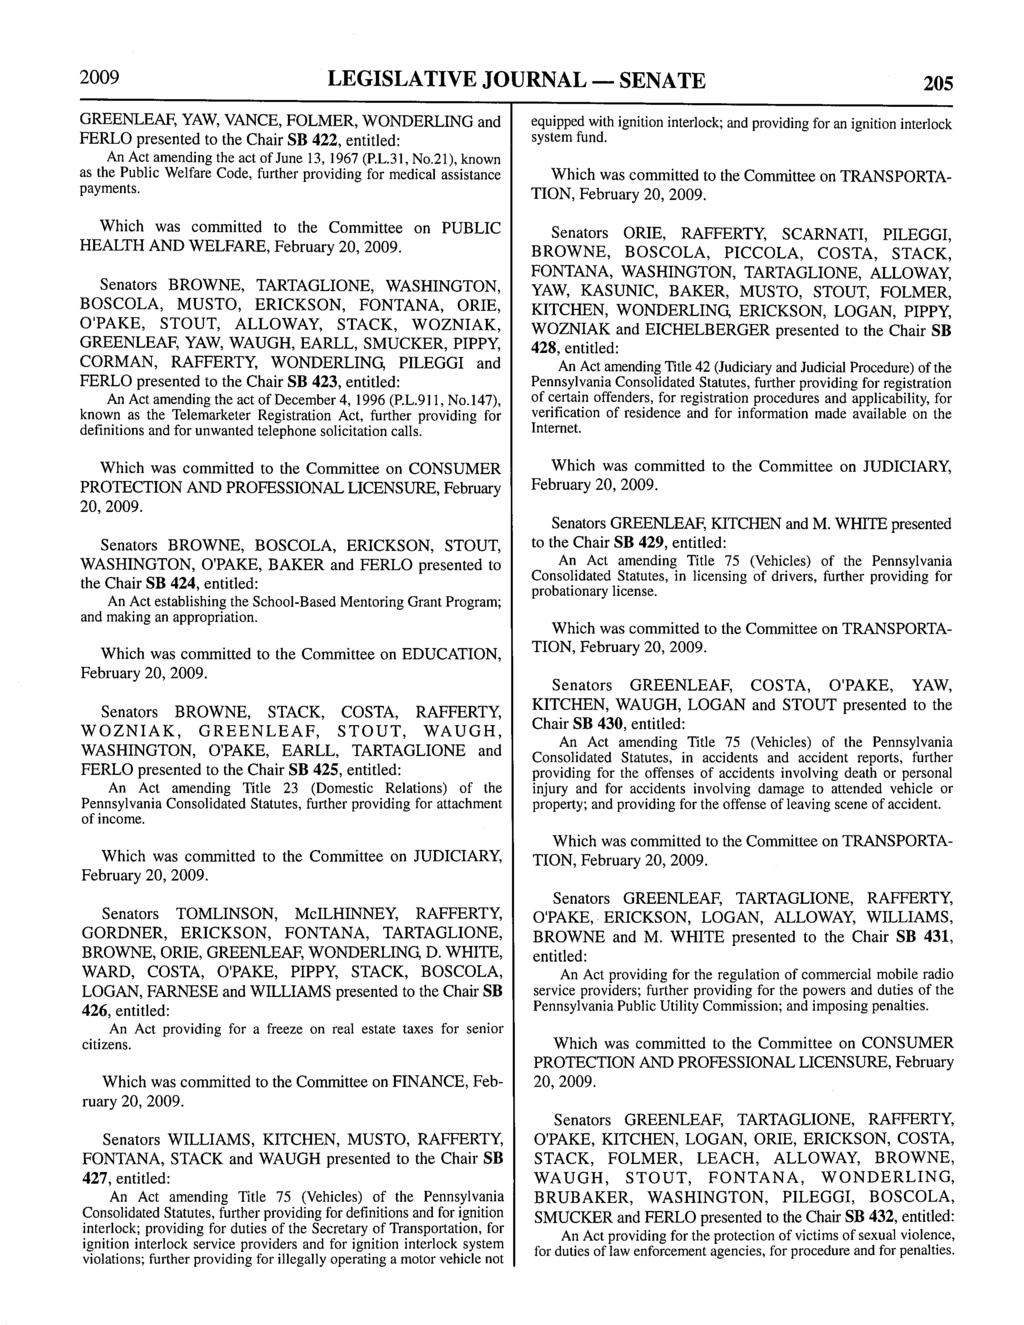 2009 LEGISLATIVE JOURNAL - SENATE 205 GREENLEAF, YAW, VANCE, FOLMER, WONDERLING and FERLO presented to the Chair SB 422, An Act amending the act of June 13, 1967 (P.L.31, No.